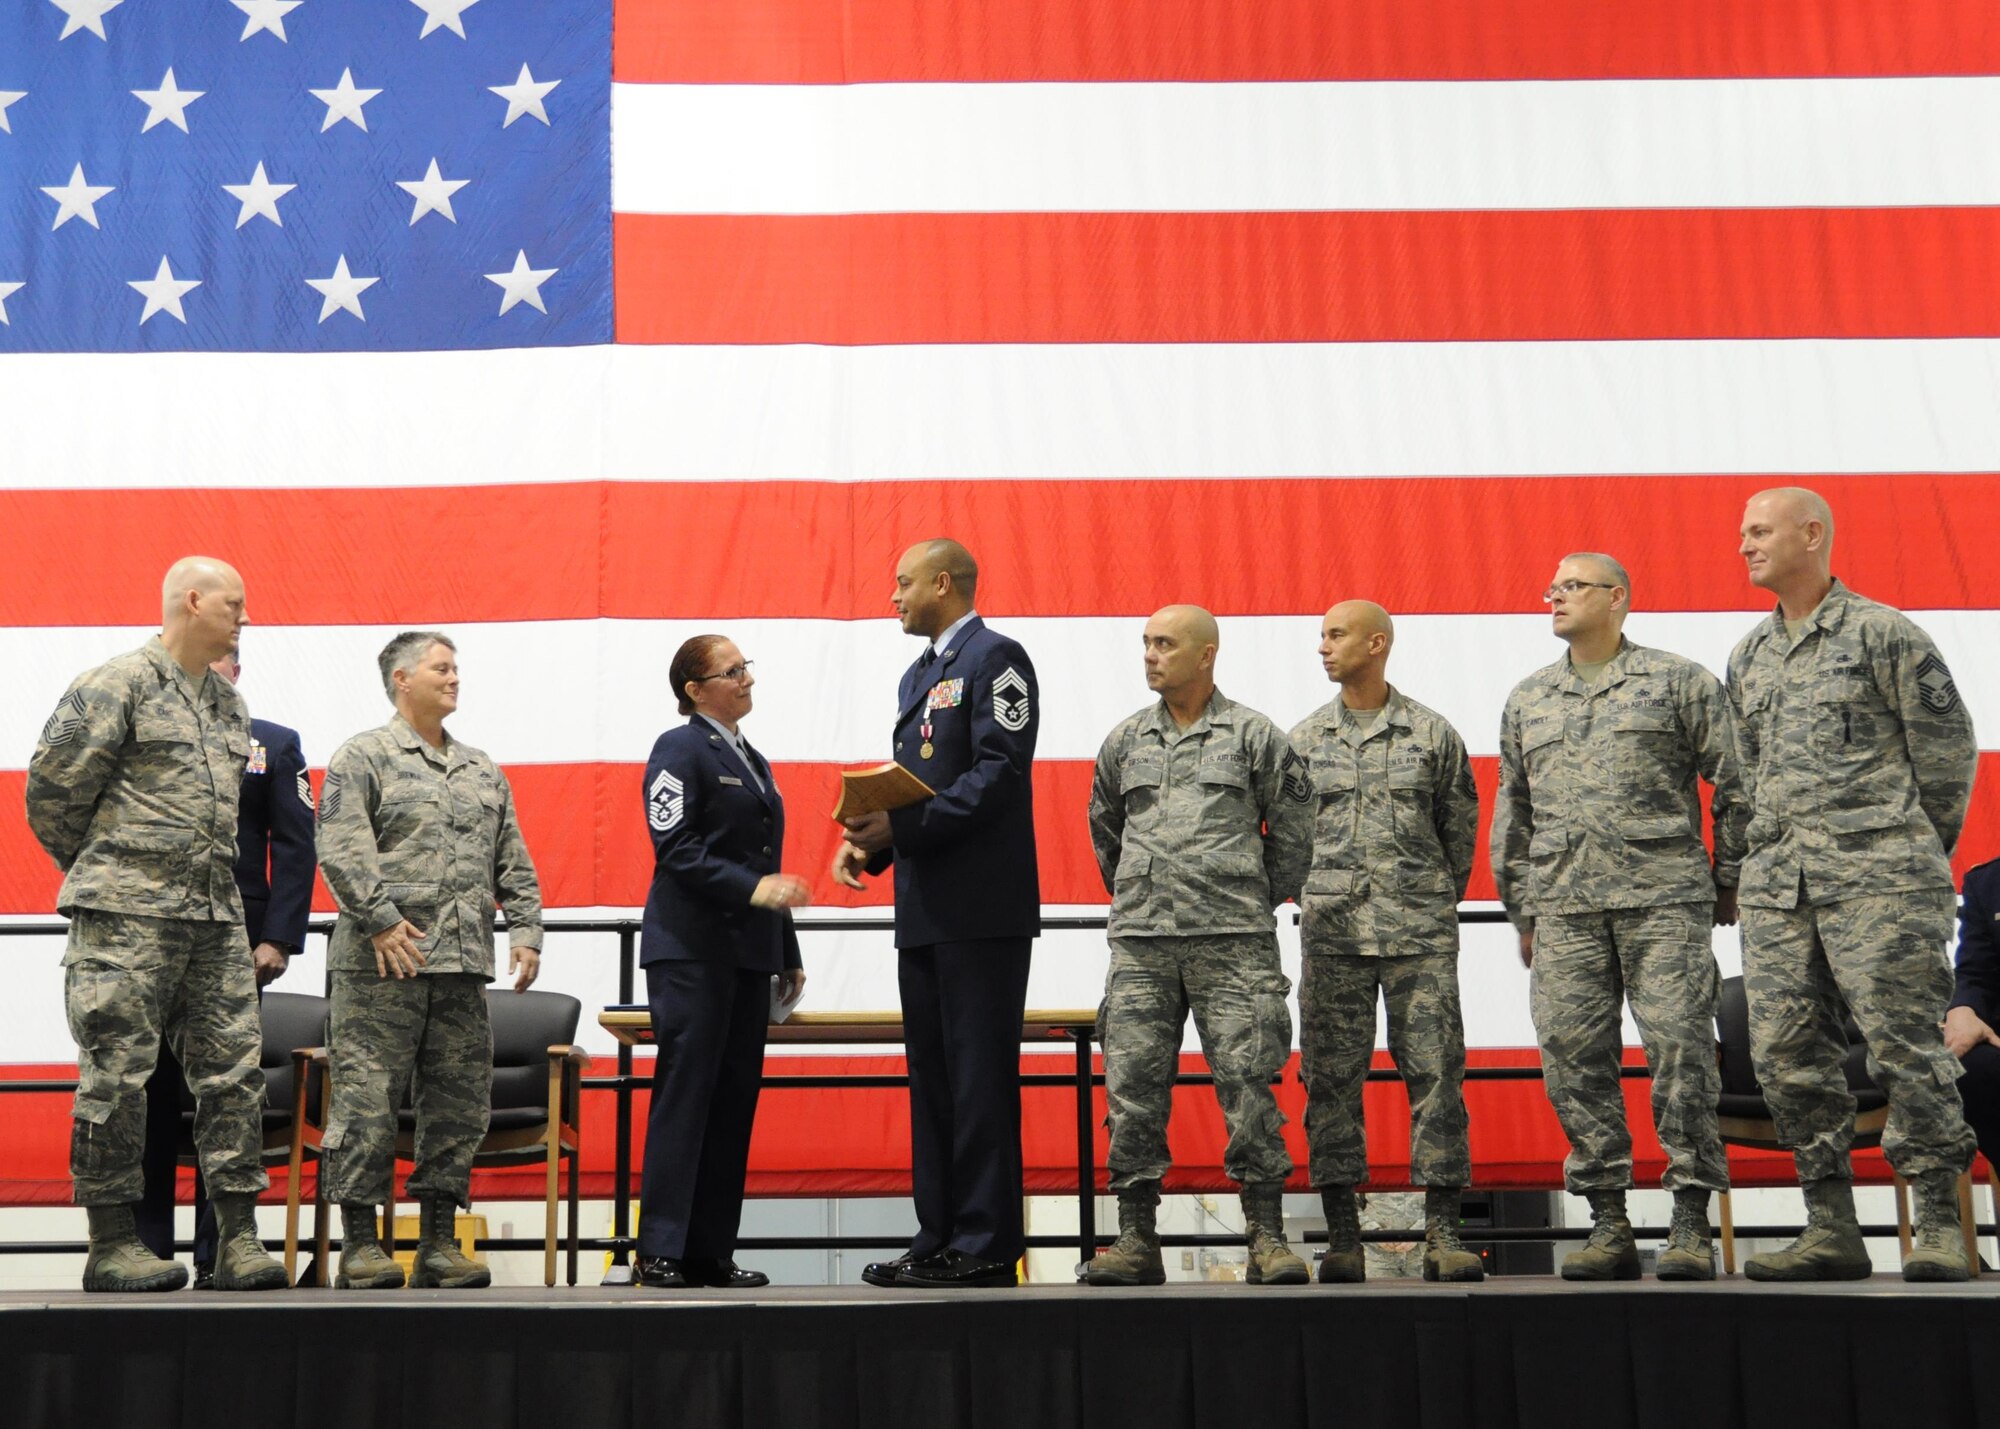 U.S. Air Force Chief Master Sgt. Kellie Askew, 442d Aircraft Maintenance Squadron deputy superintendent, joins the rank of chief during his promotion ceremony at Whiteman Air Force Base, Missouri, Jan. 7, 2017. Askew became an Air Reserve Technician for the 442d Maintenance Group in 1997. (U.S. Air Force photo/Senior Airman Missy Sterling)